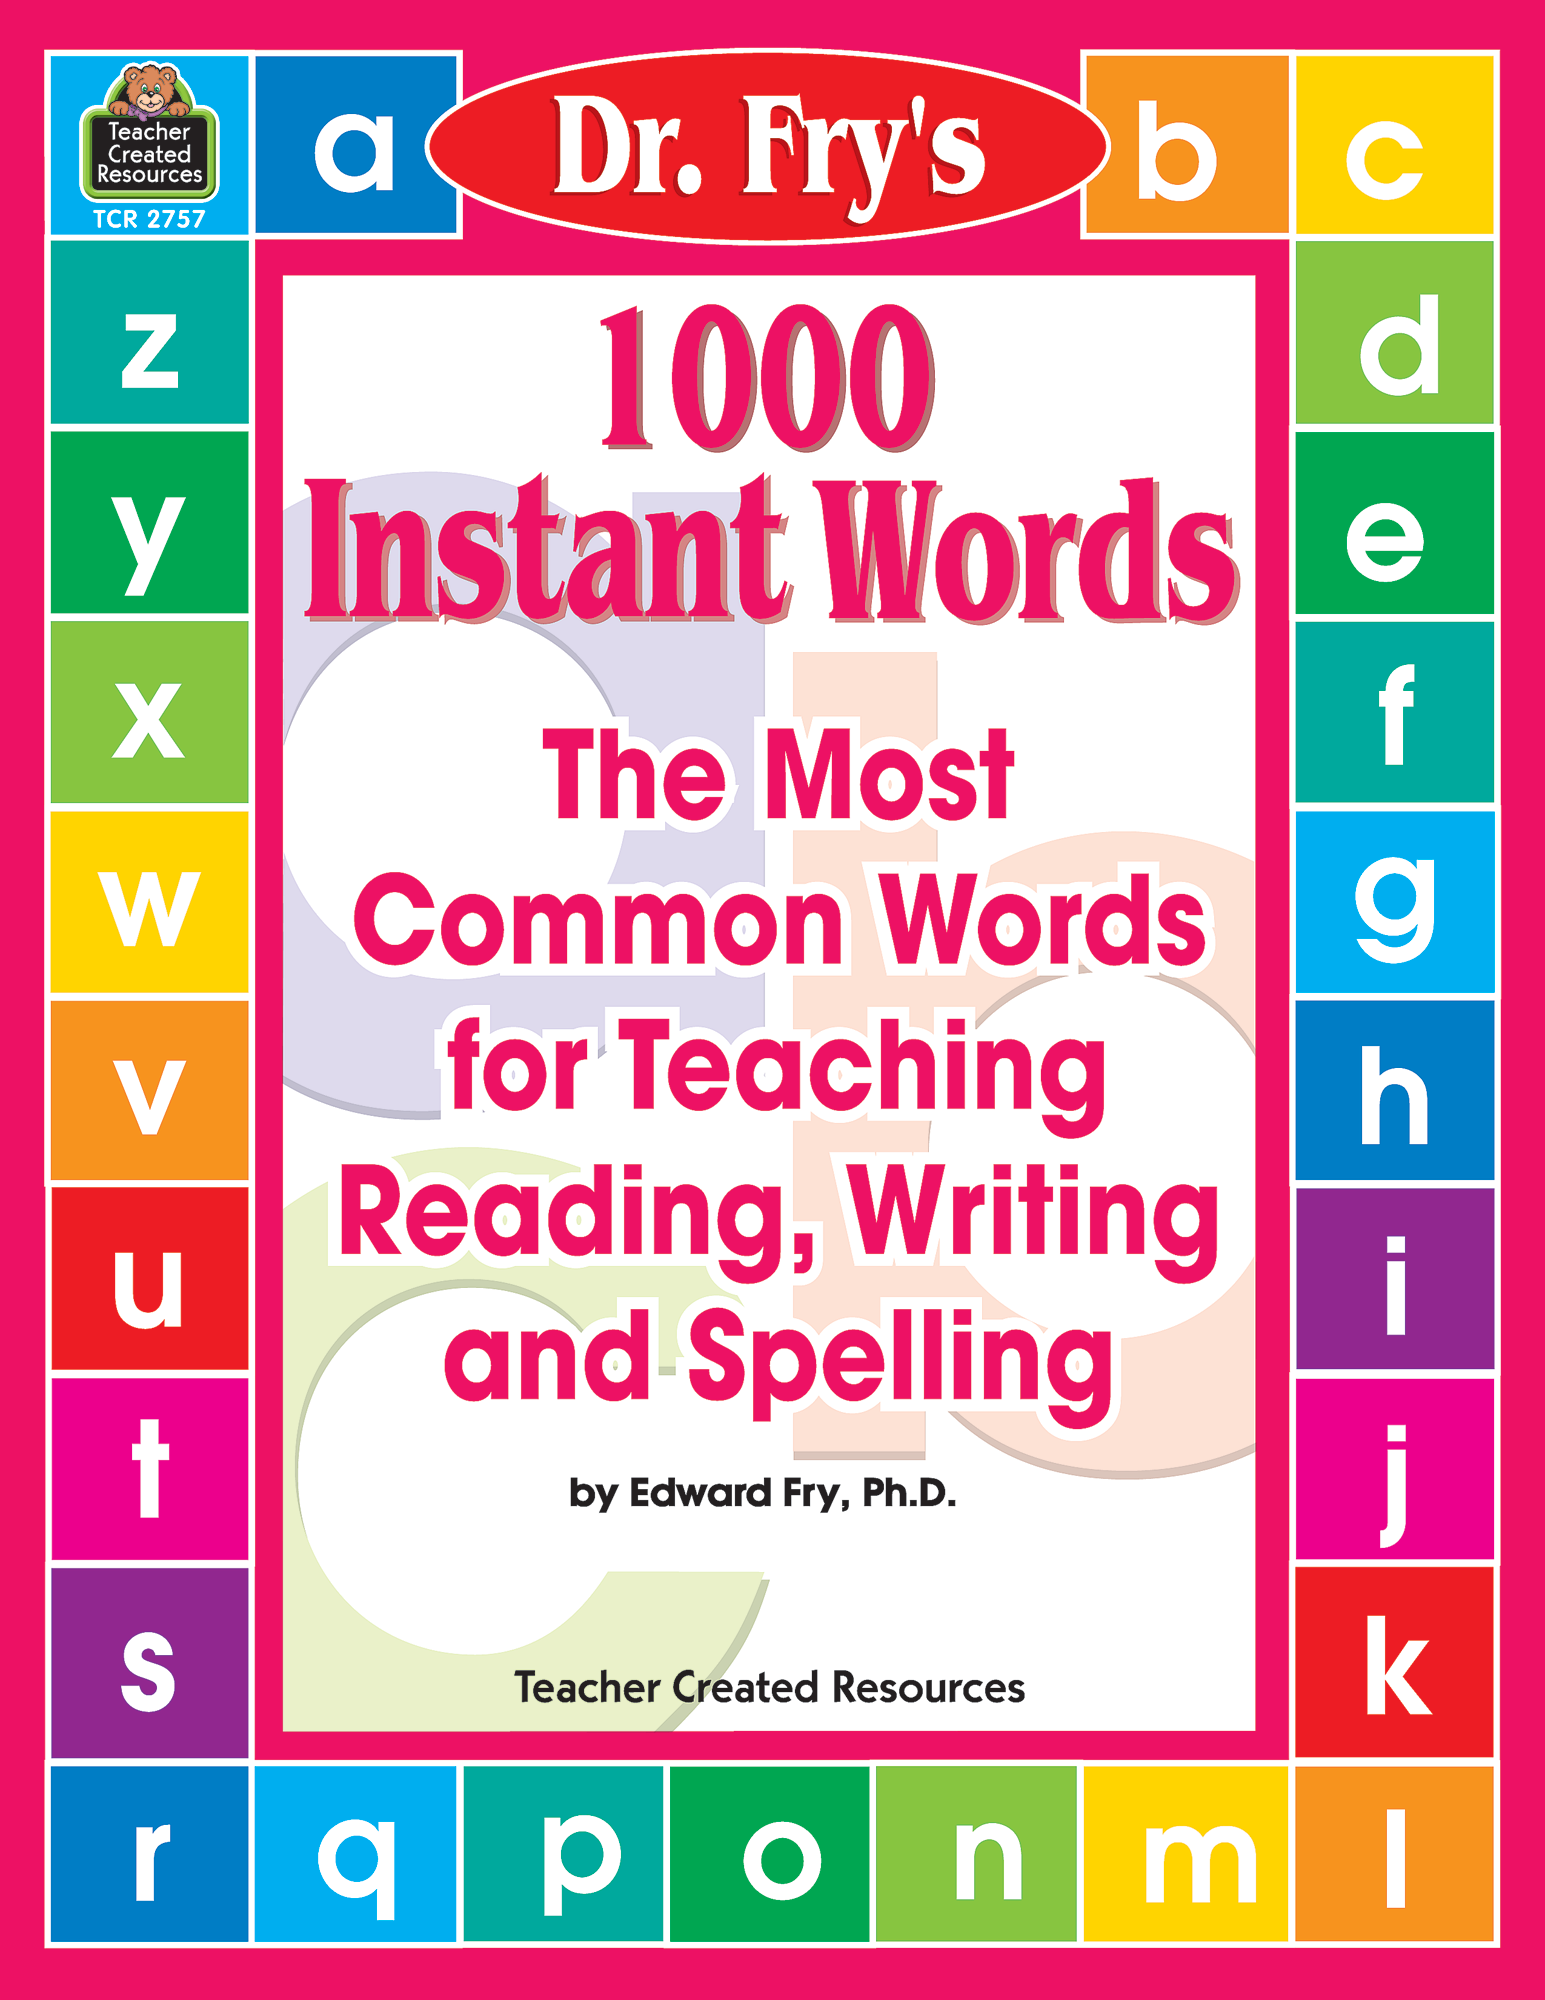 1000 Instant Words by Dr. Fry